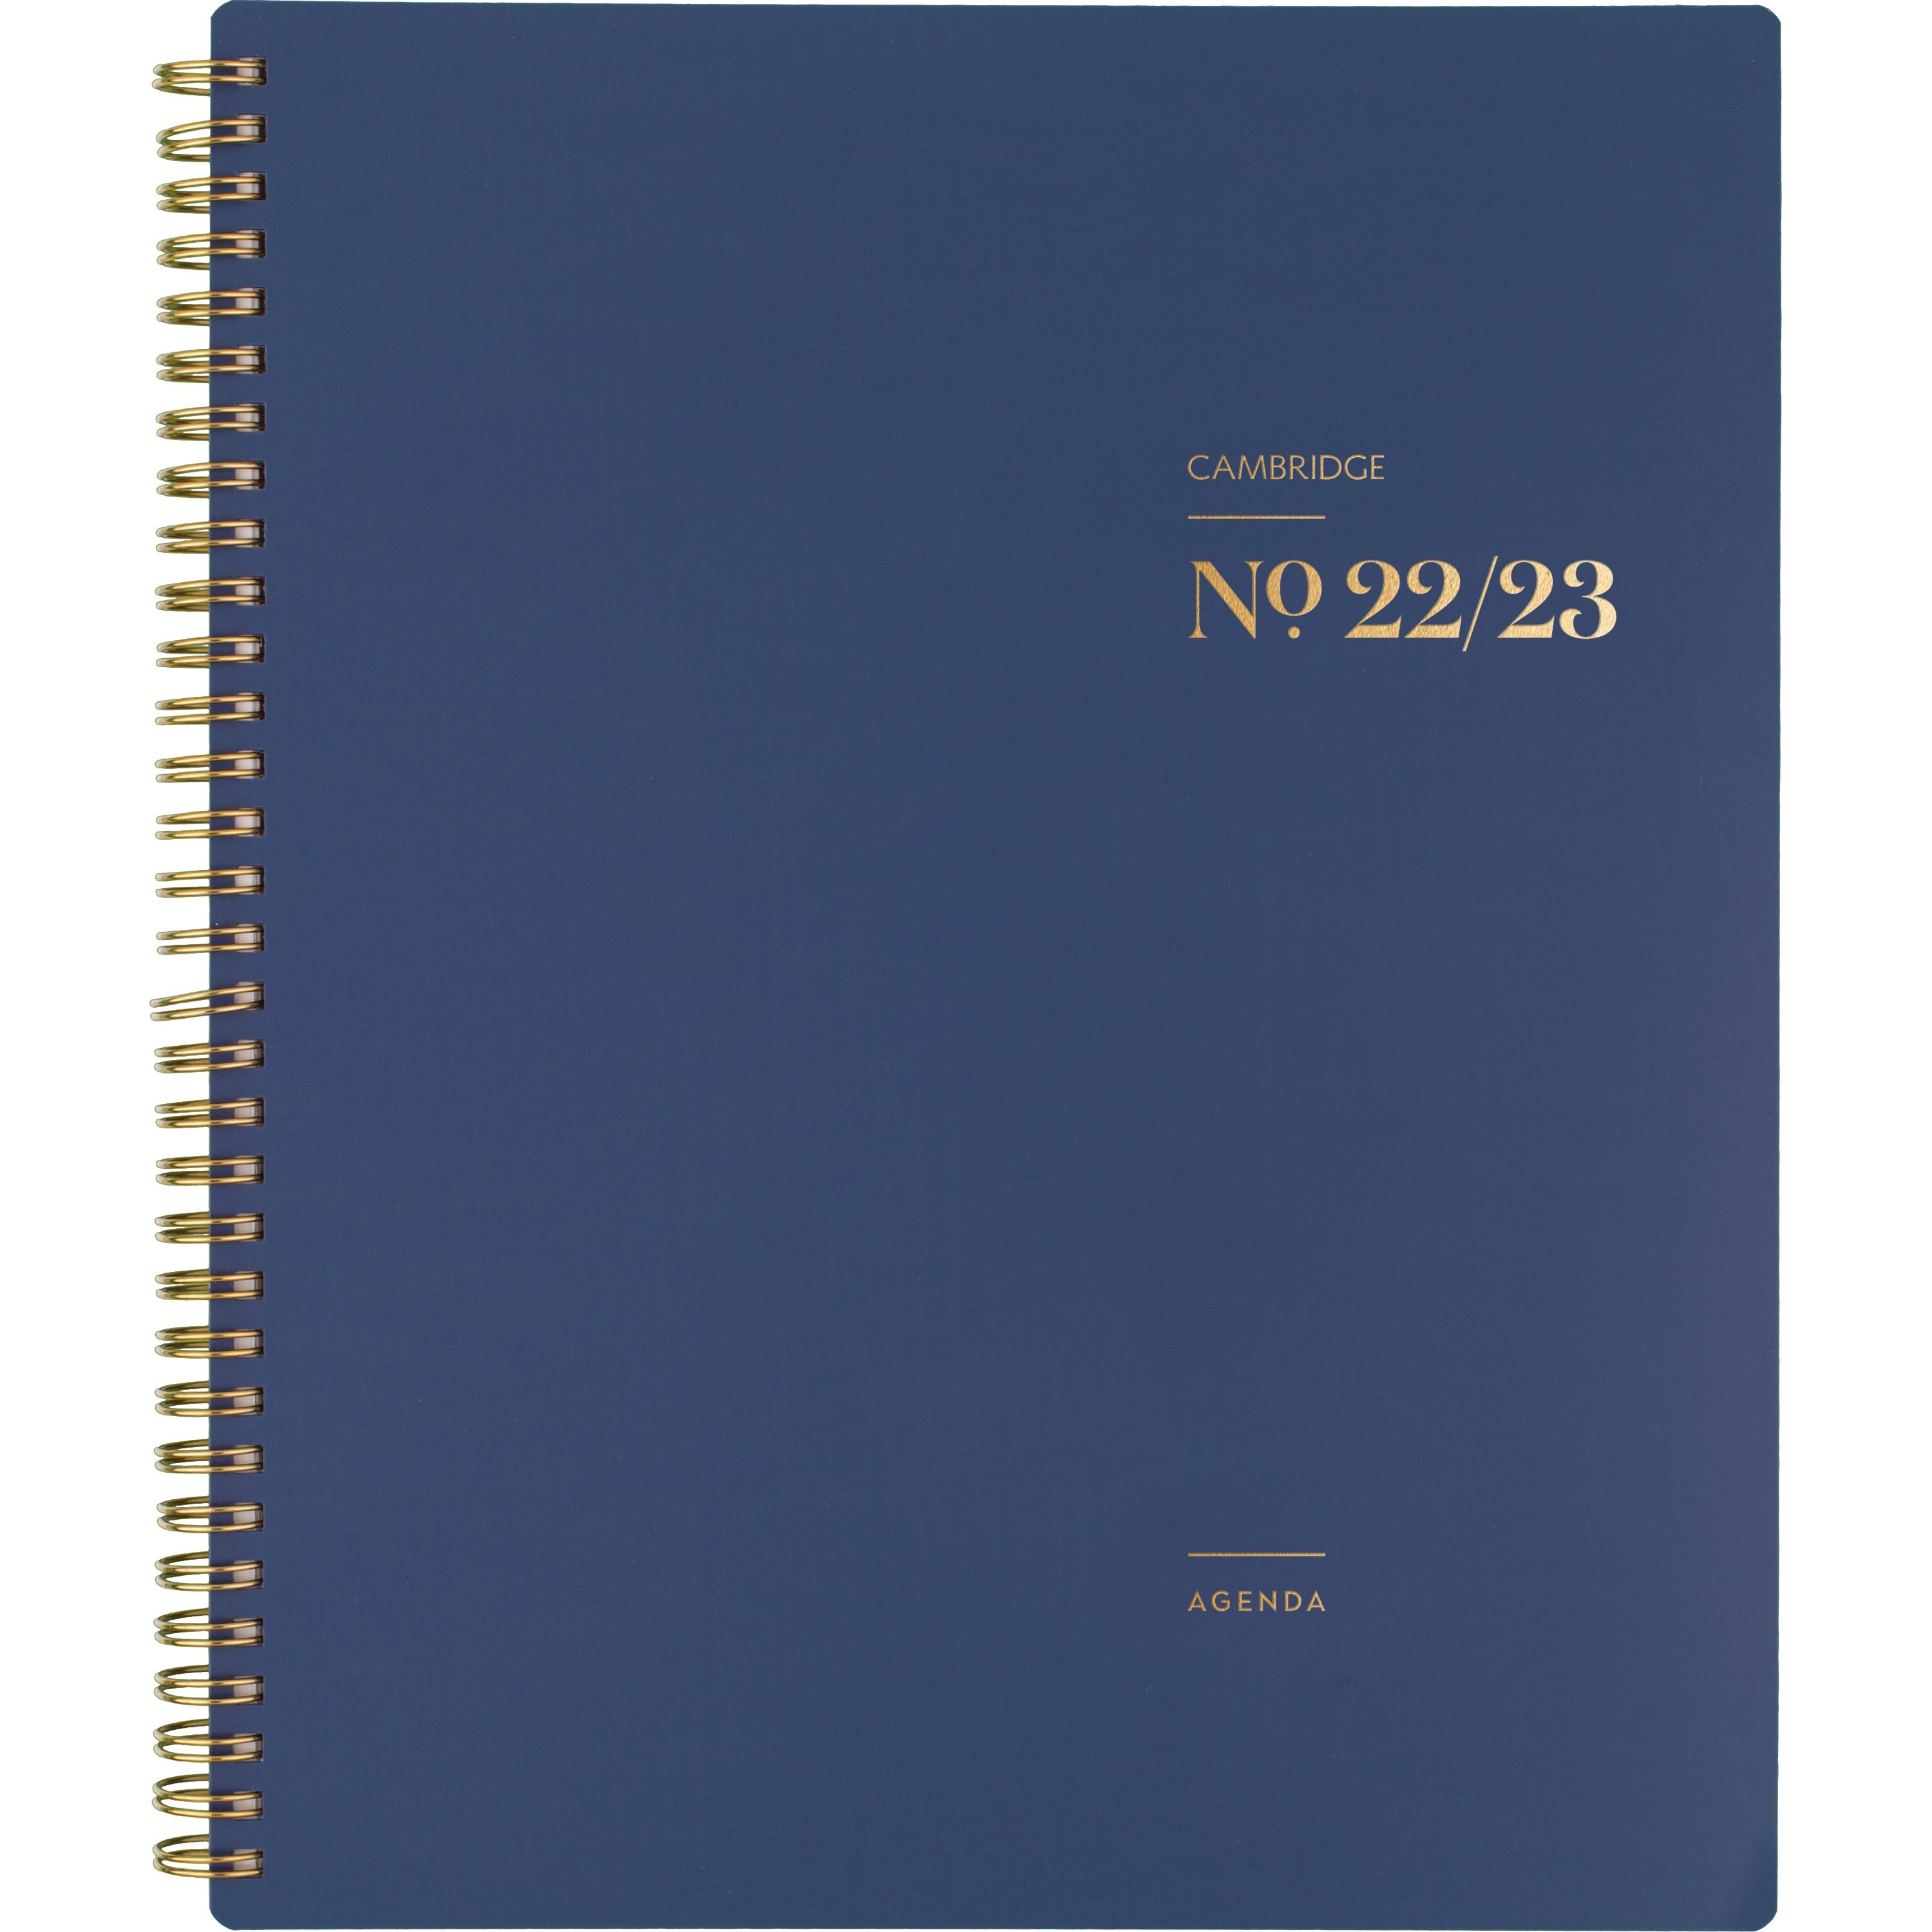 Cambridge(R) WorkStyle Classic Academic 2022-2023 Weekly Monthly Planner, Navy, Large, 8 1/2" x 11"